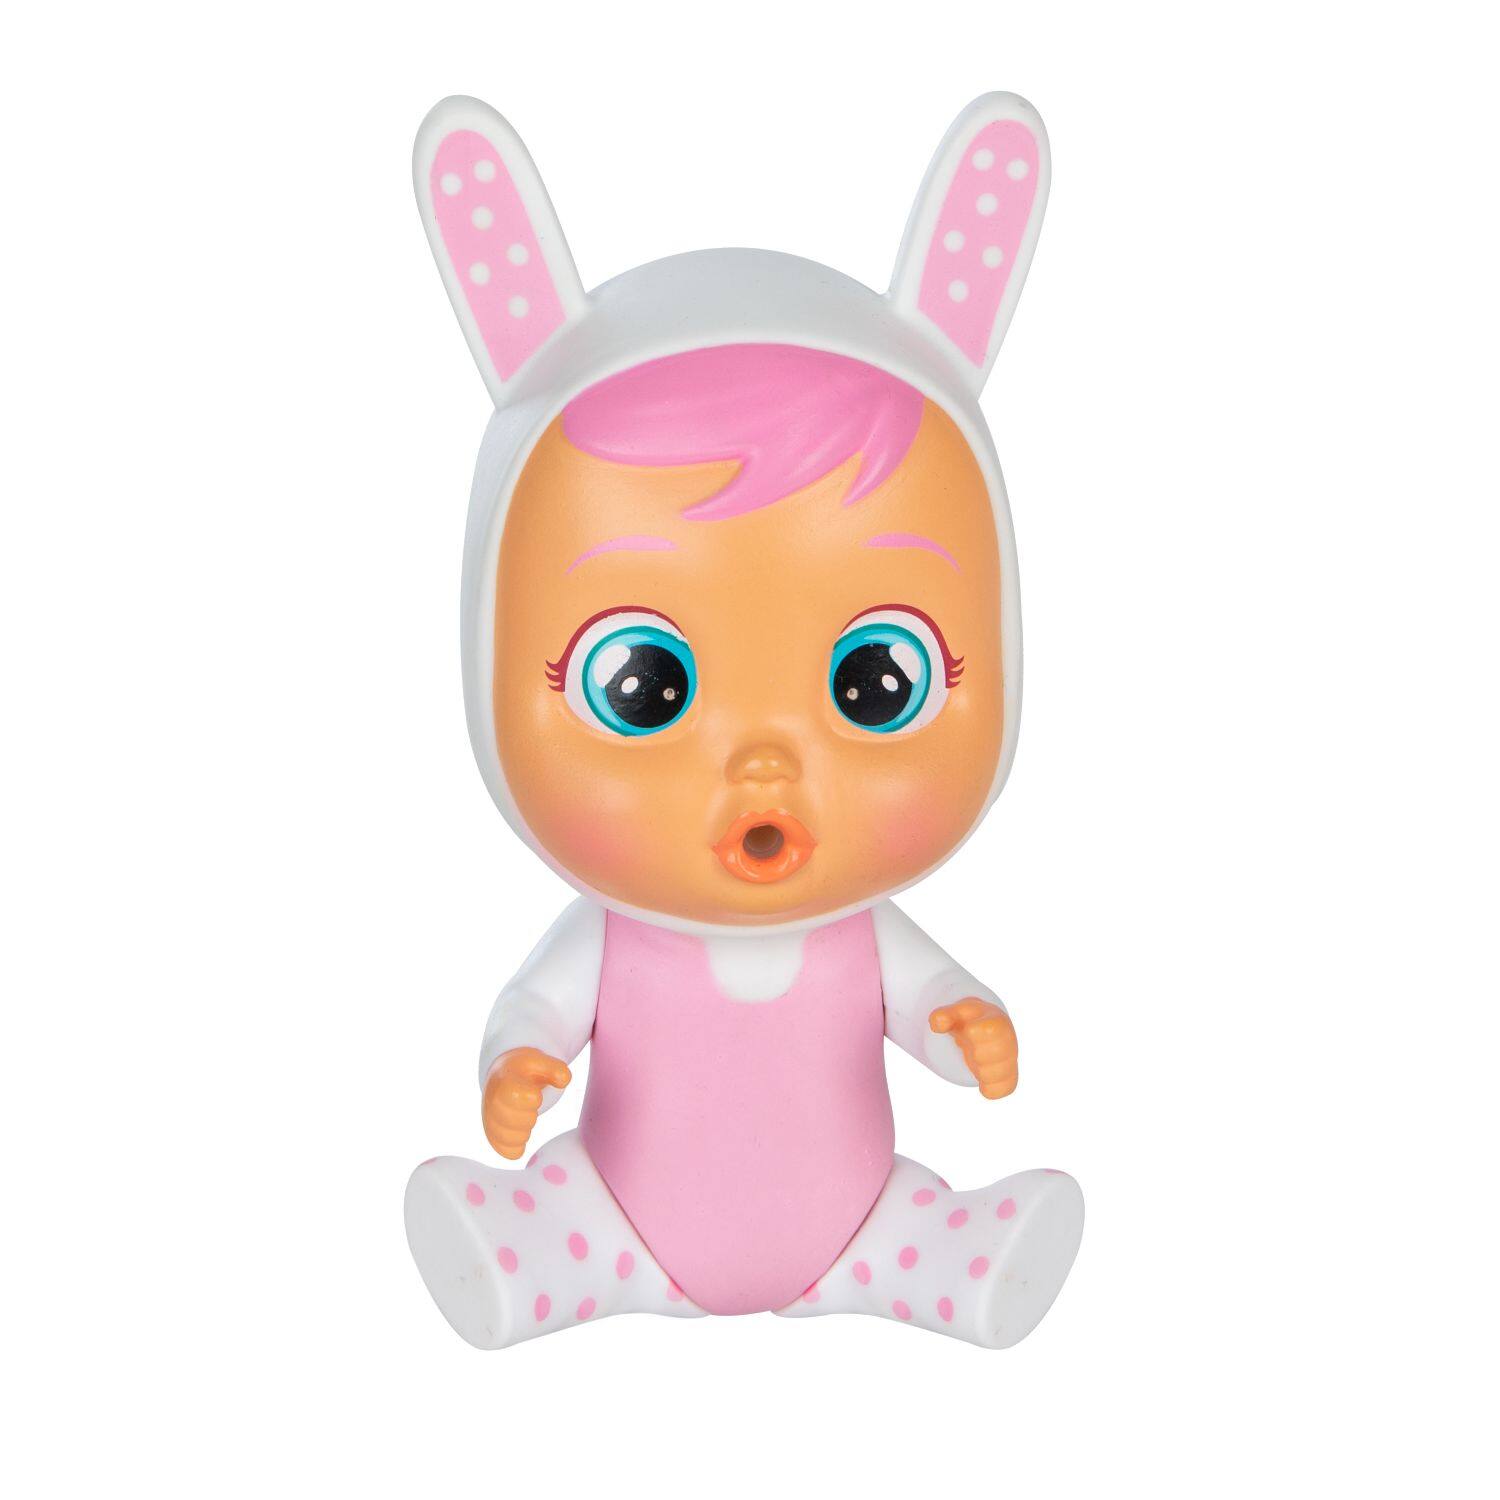 Cry Babies Star Coney 12 Baby Doll W/ Light Up Eyes And Star